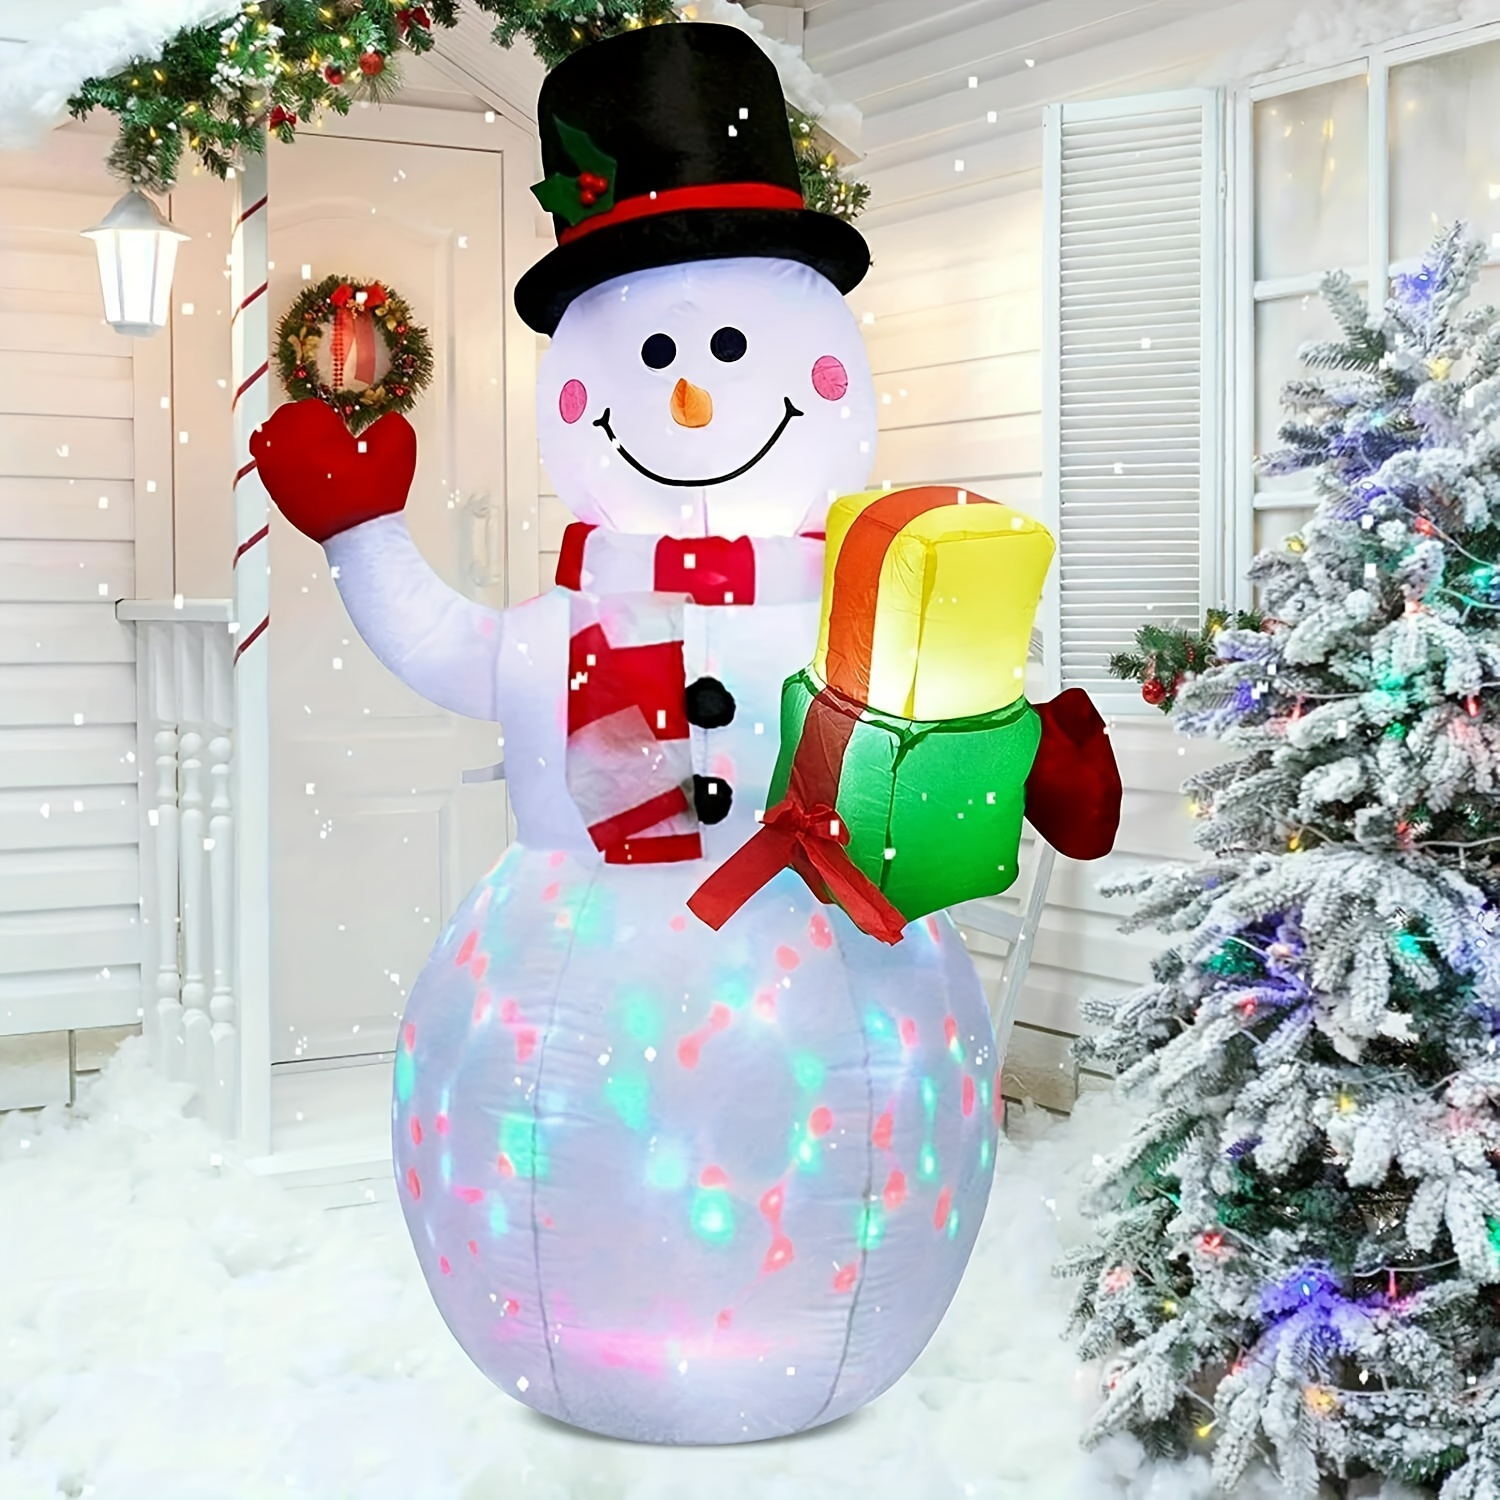 

5ft Christmas Inflatables Snowman Outdoor Yard Decor With Rotating Led Lights Christmas Blow Up Decoration Garden